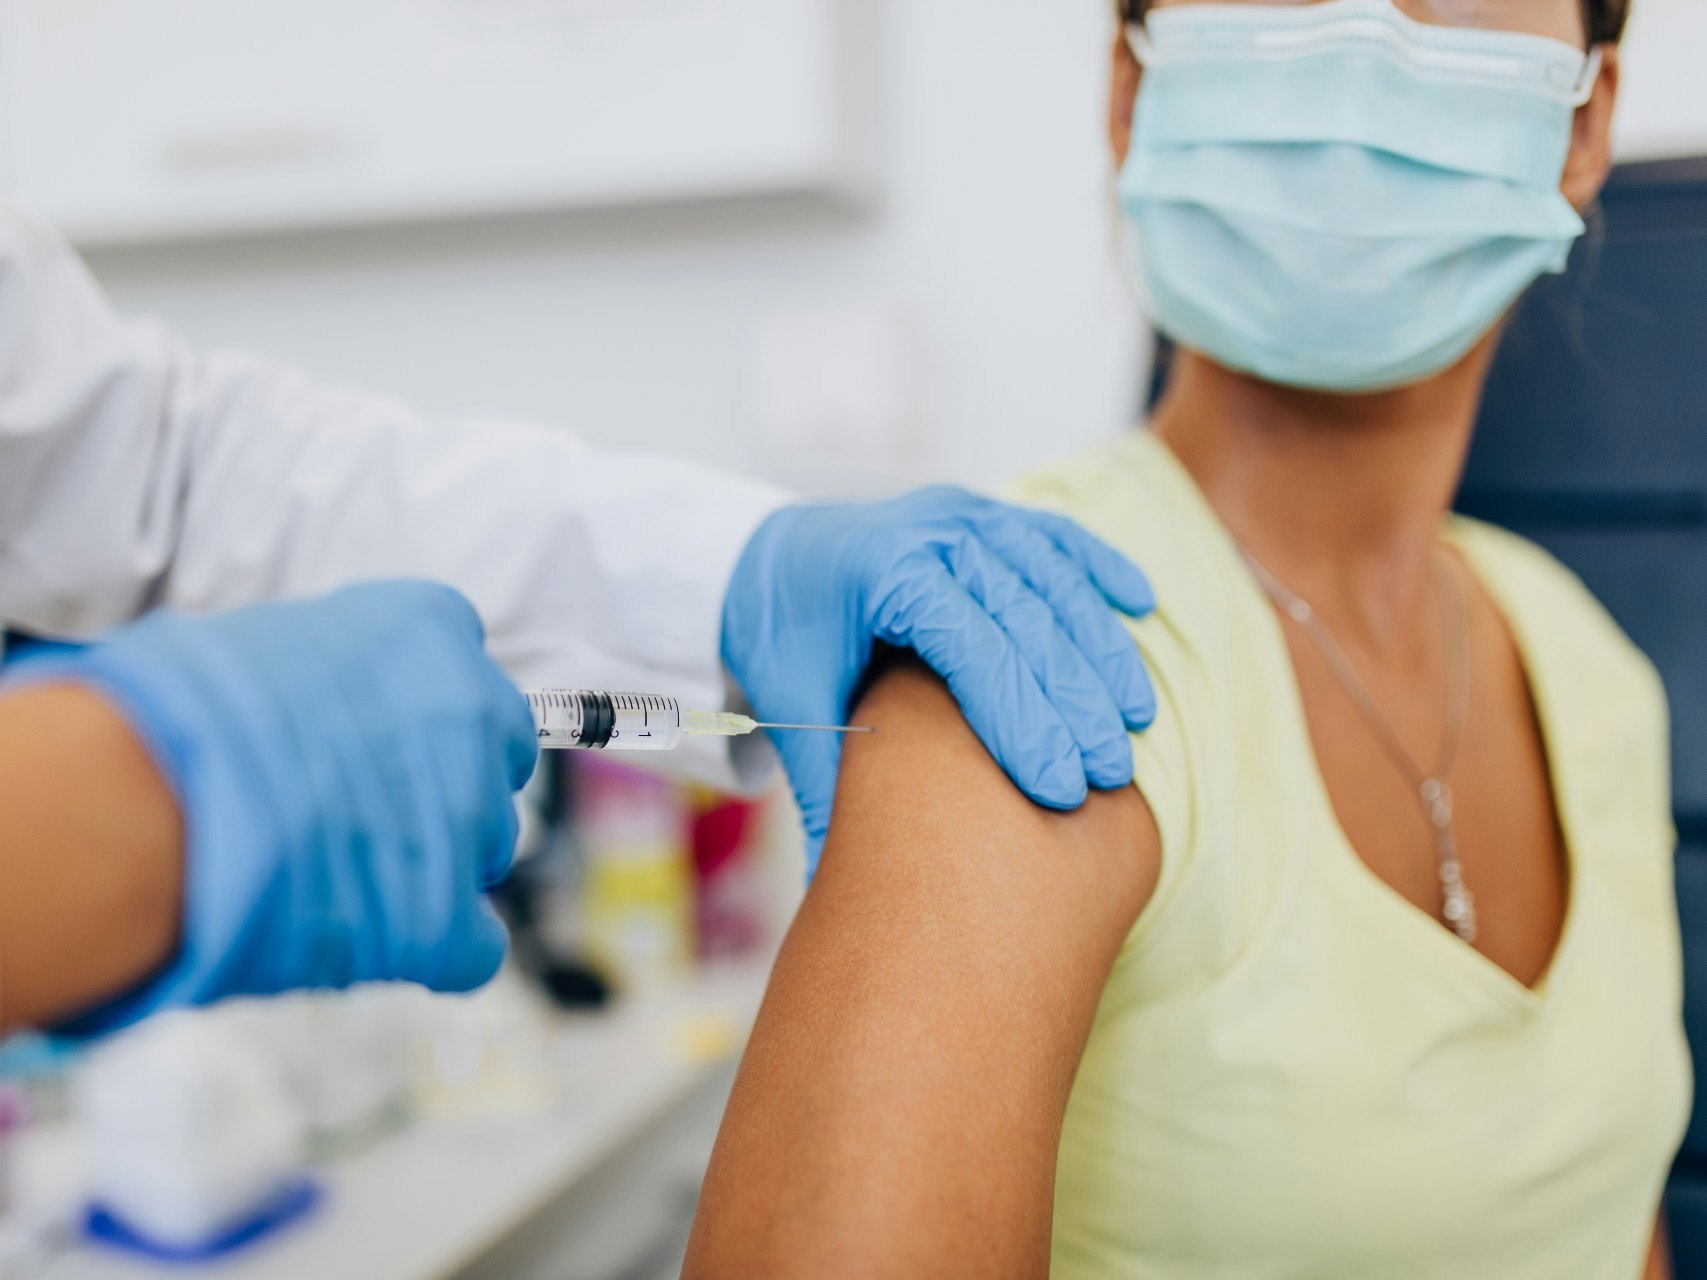 <p>Disability workers will not be required to receive the COVID-19 vaccine to continue working, however this arrangement is set to be reviewed again by National Cabinet next month. [Source: Shutterstock]</p>
